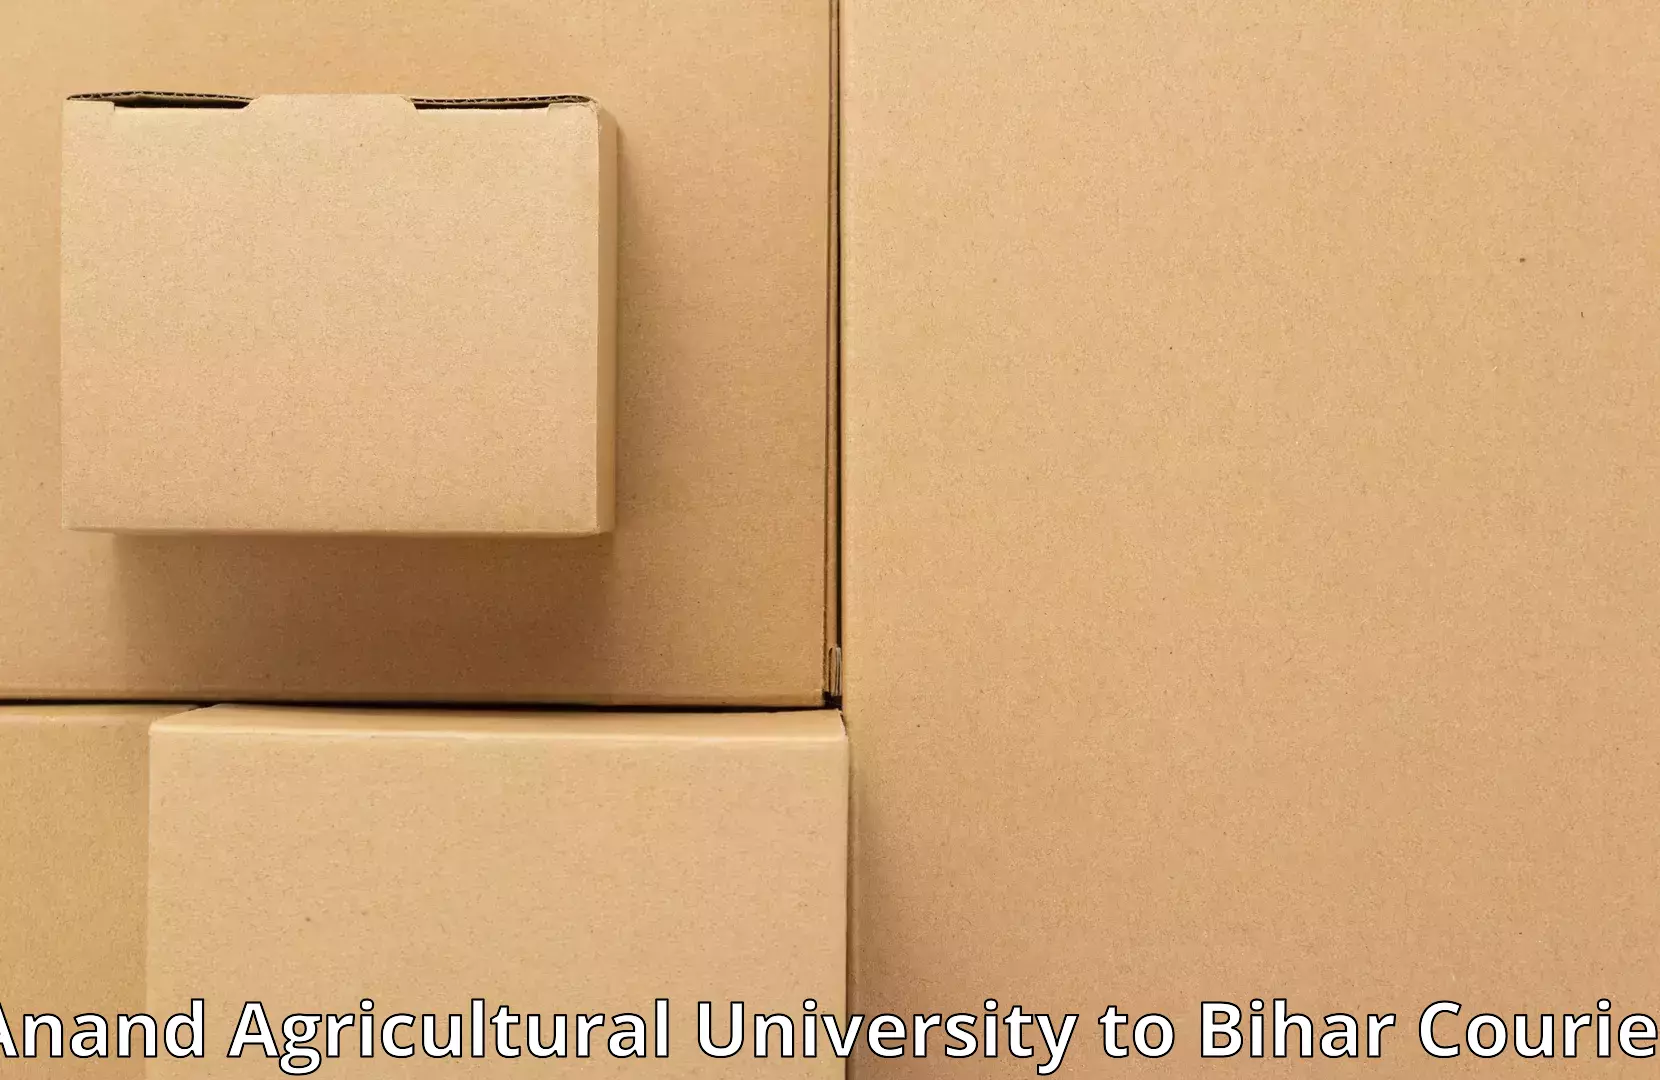 Furniture moving assistance Anand Agricultural University to East Champaran